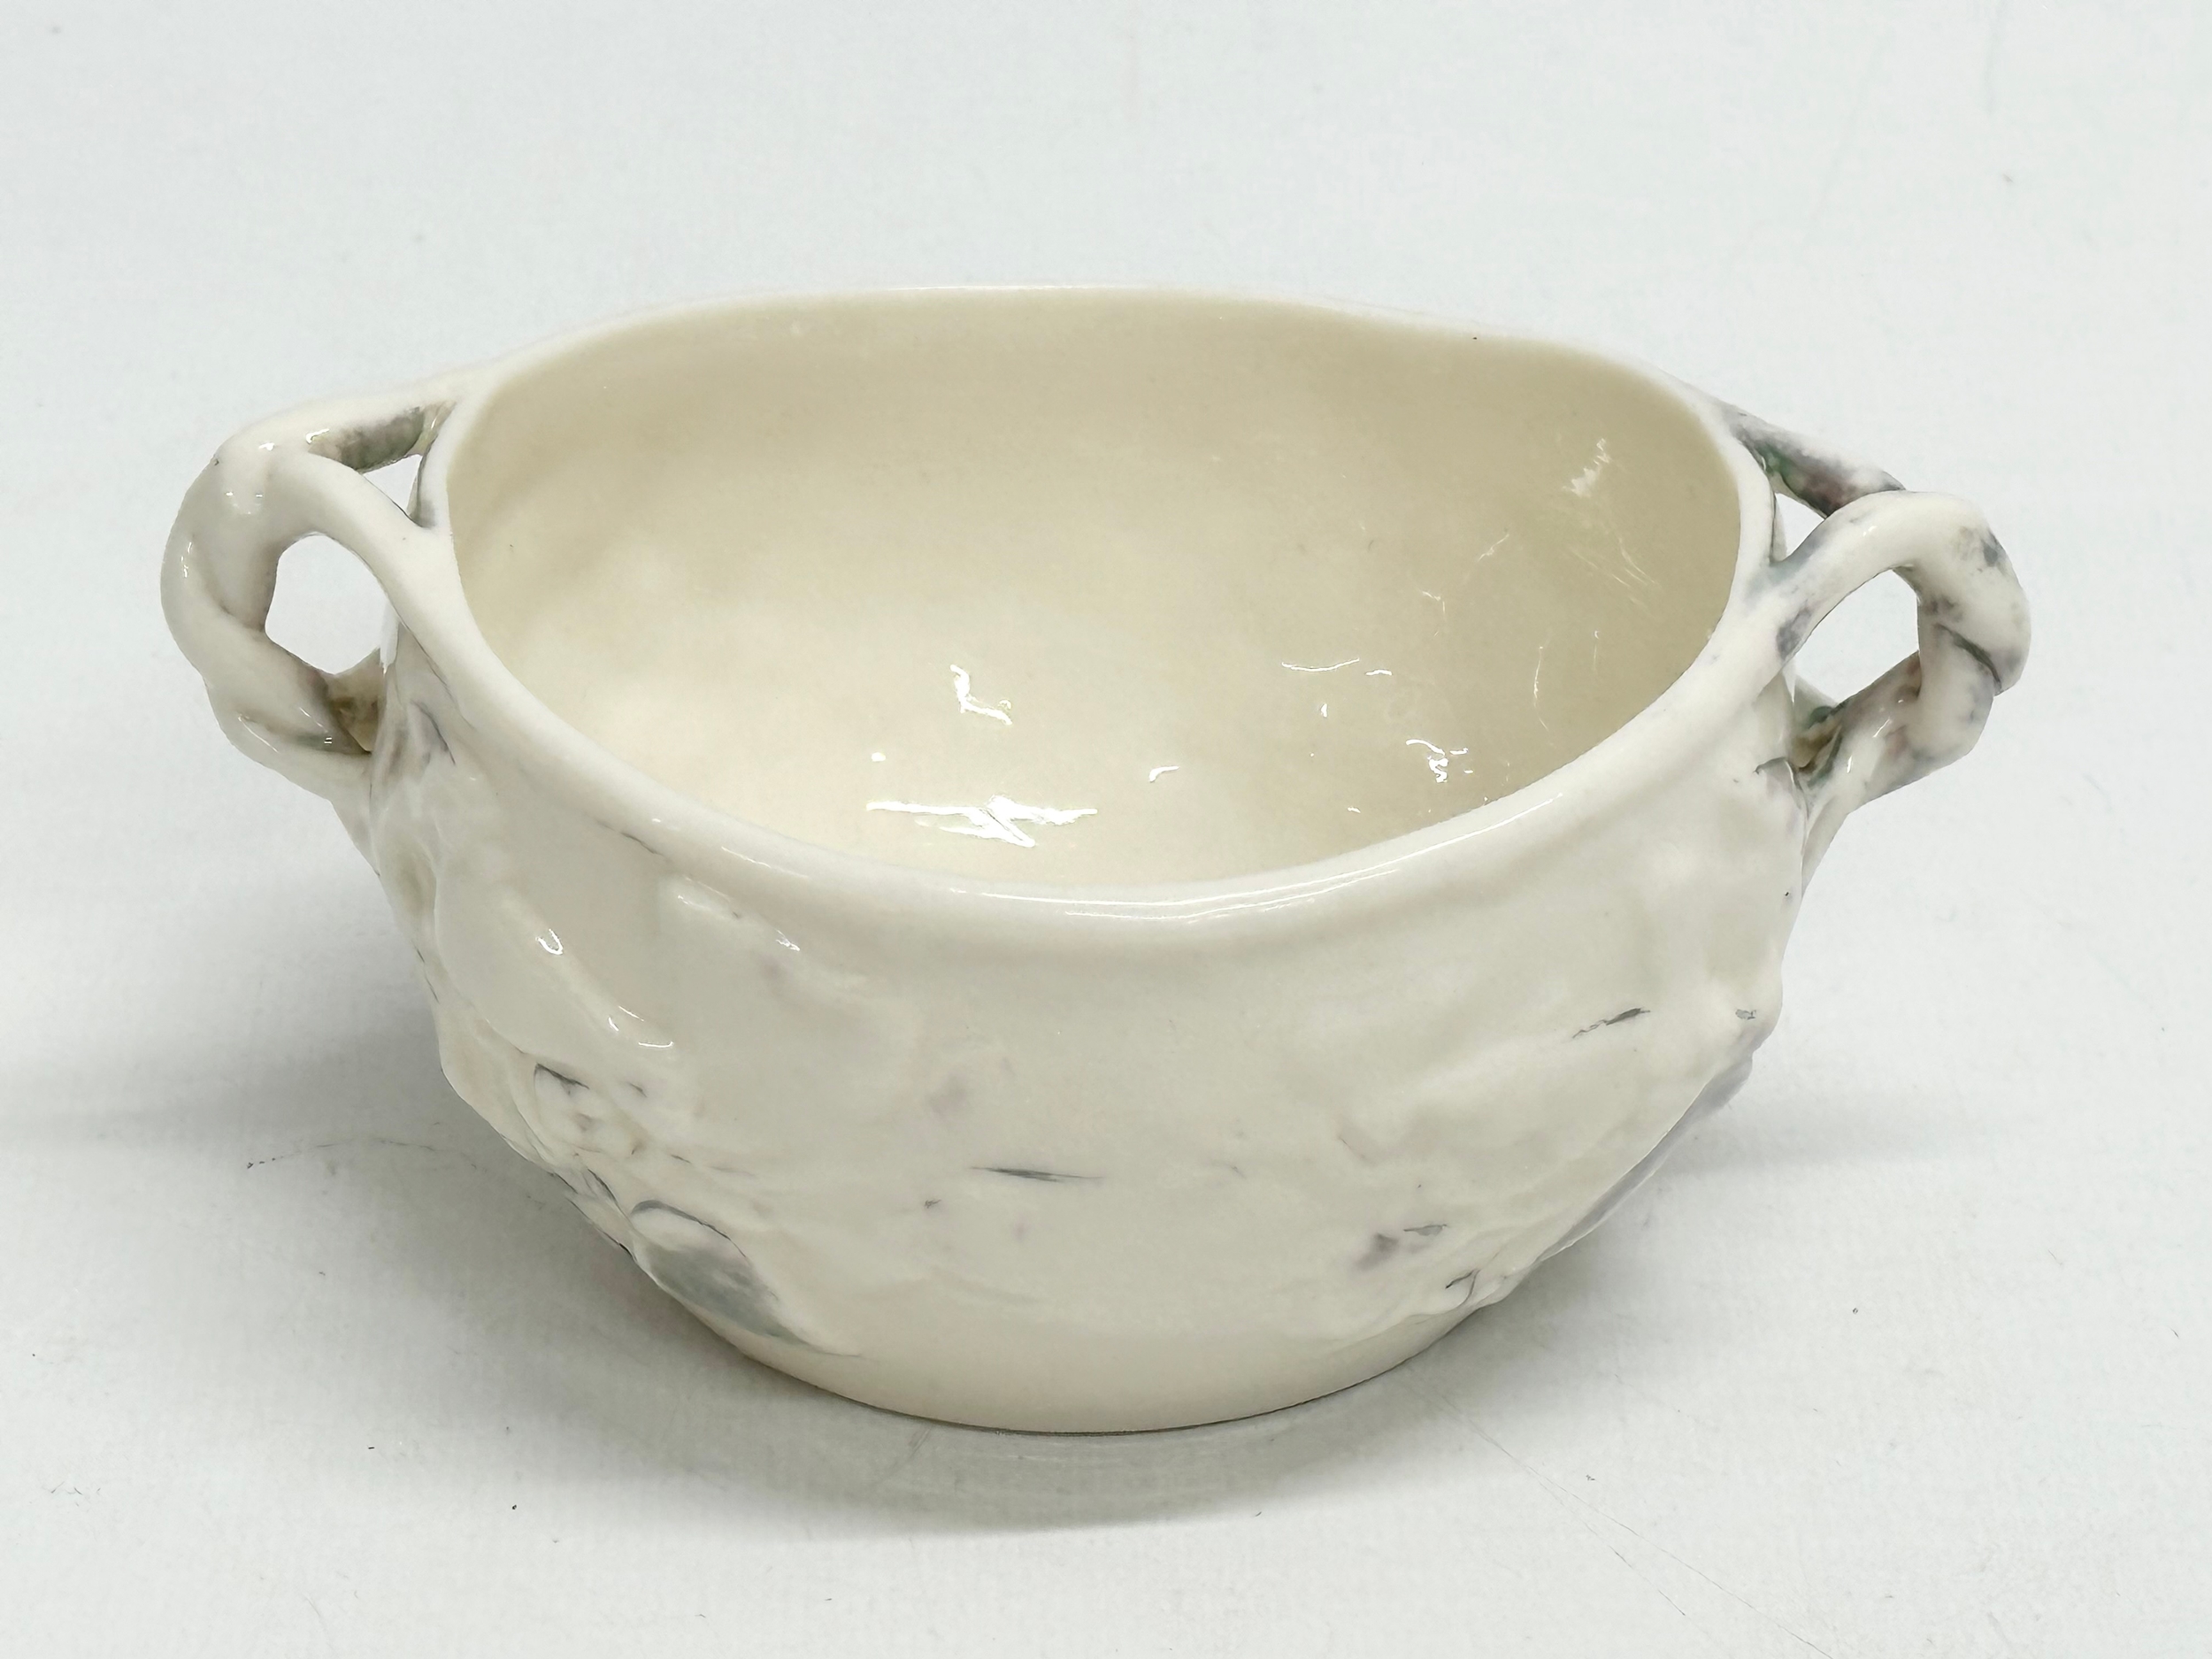 A rare 1st Period Belleek 2 handled Ivory sugar bowl with green and black stamp, circa 1863-1870, - Image 5 of 10